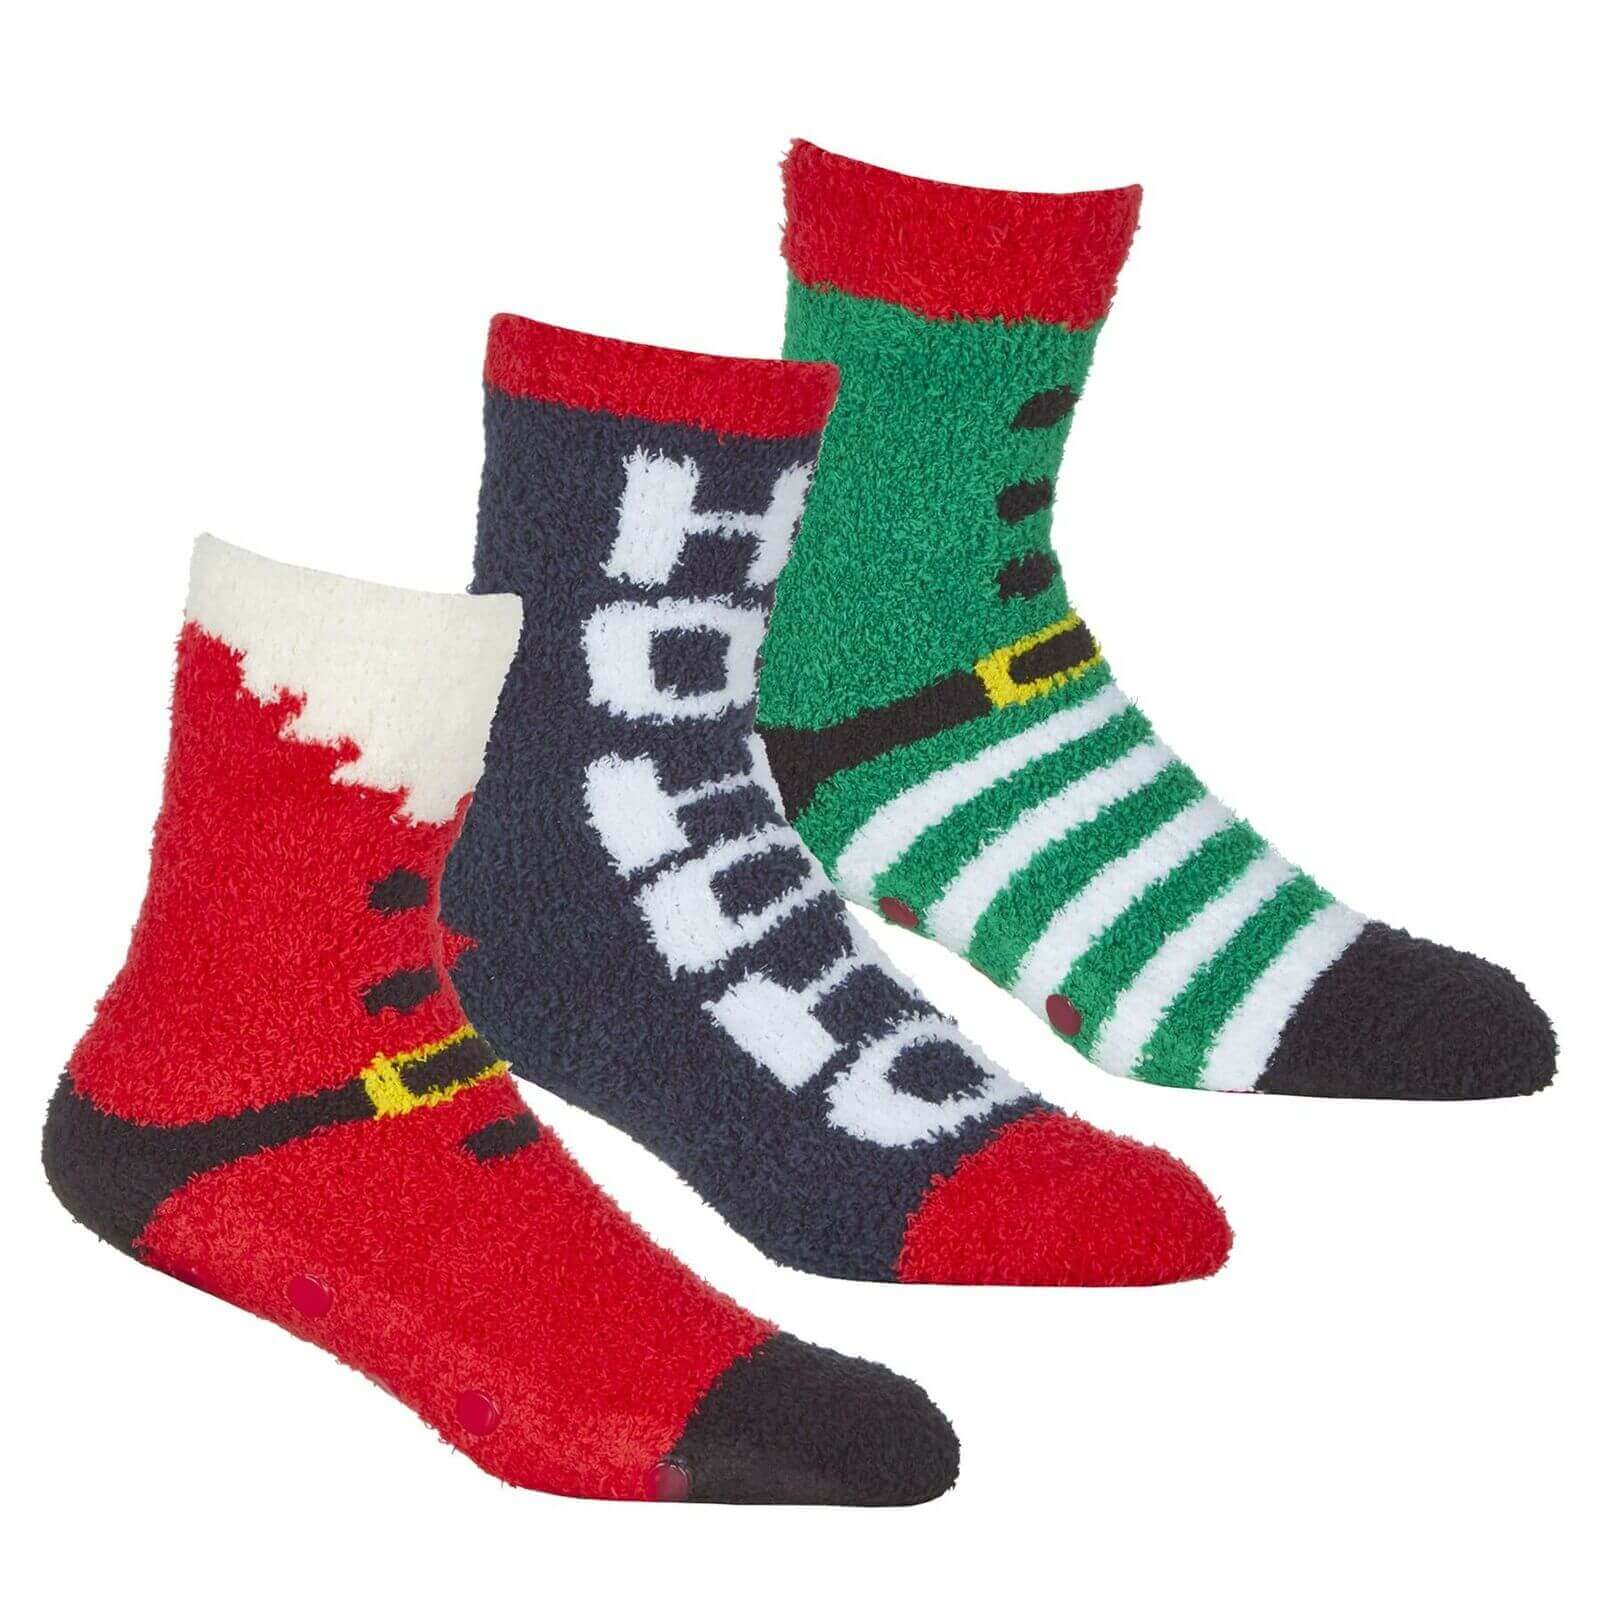 3 Pairs Of Men's Christmas Slipper Socks Fluffy Lounge Sock Xmas Santa Elf Gift. Buy now for £8.00. A Socks by Sock Stack. 6-11, assorted, boot, boys, casual, christmas, comfortable, cosy, cotton, dressing, elastane, father christmas, festive, fluffy, hom